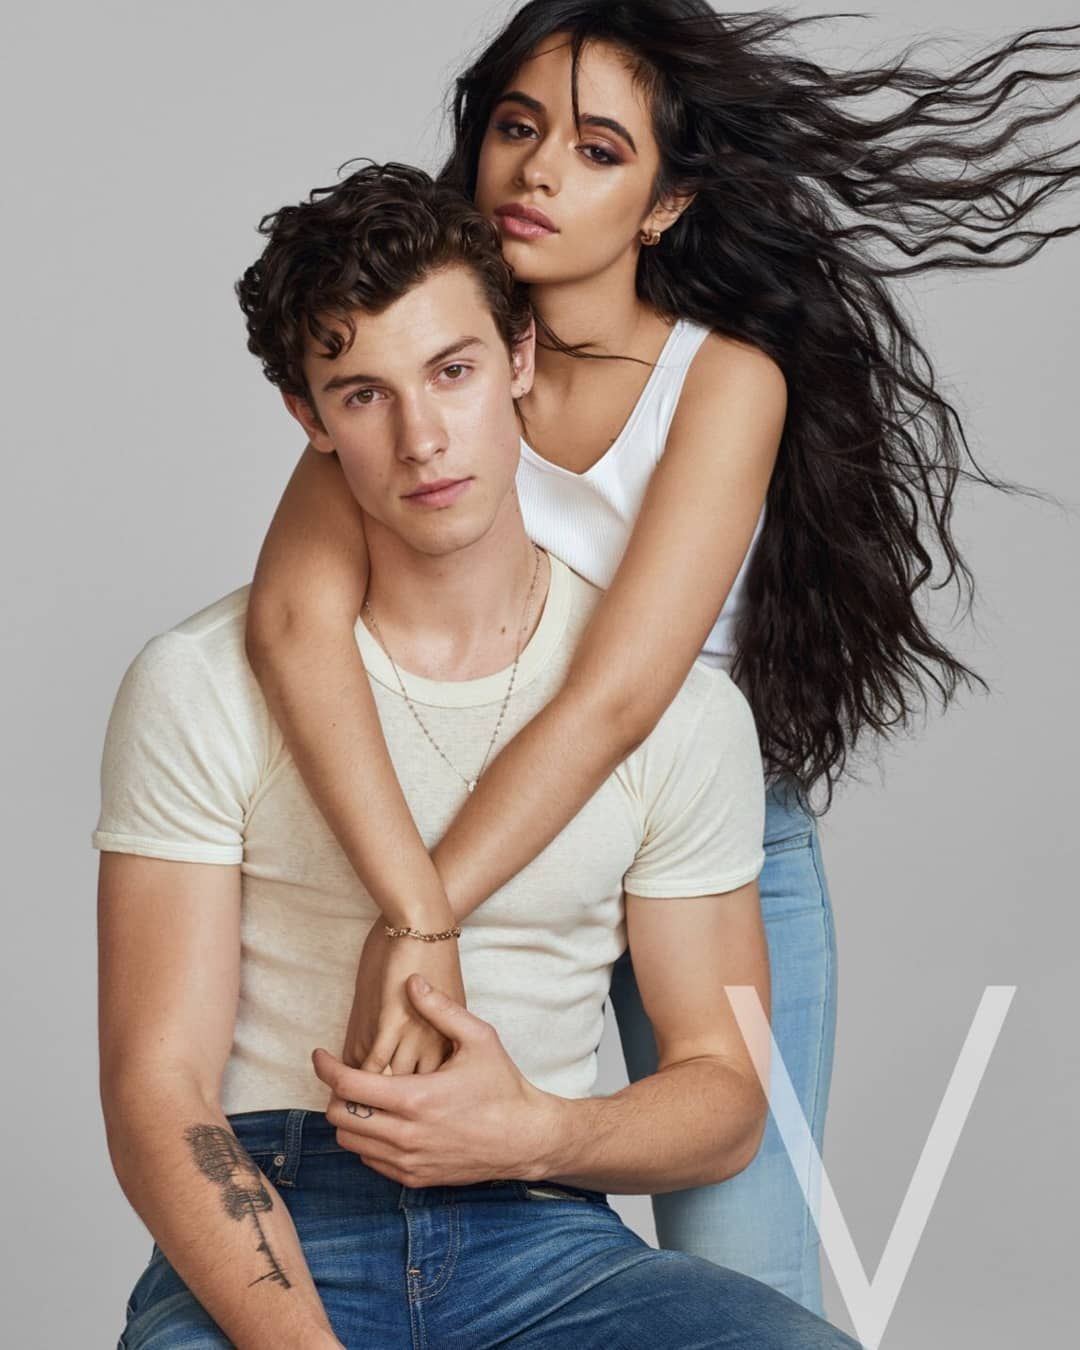 Shawn-Mendes-Camila-Cabello-Secretly-Engaged-After-1-Year-Of-Dating-1